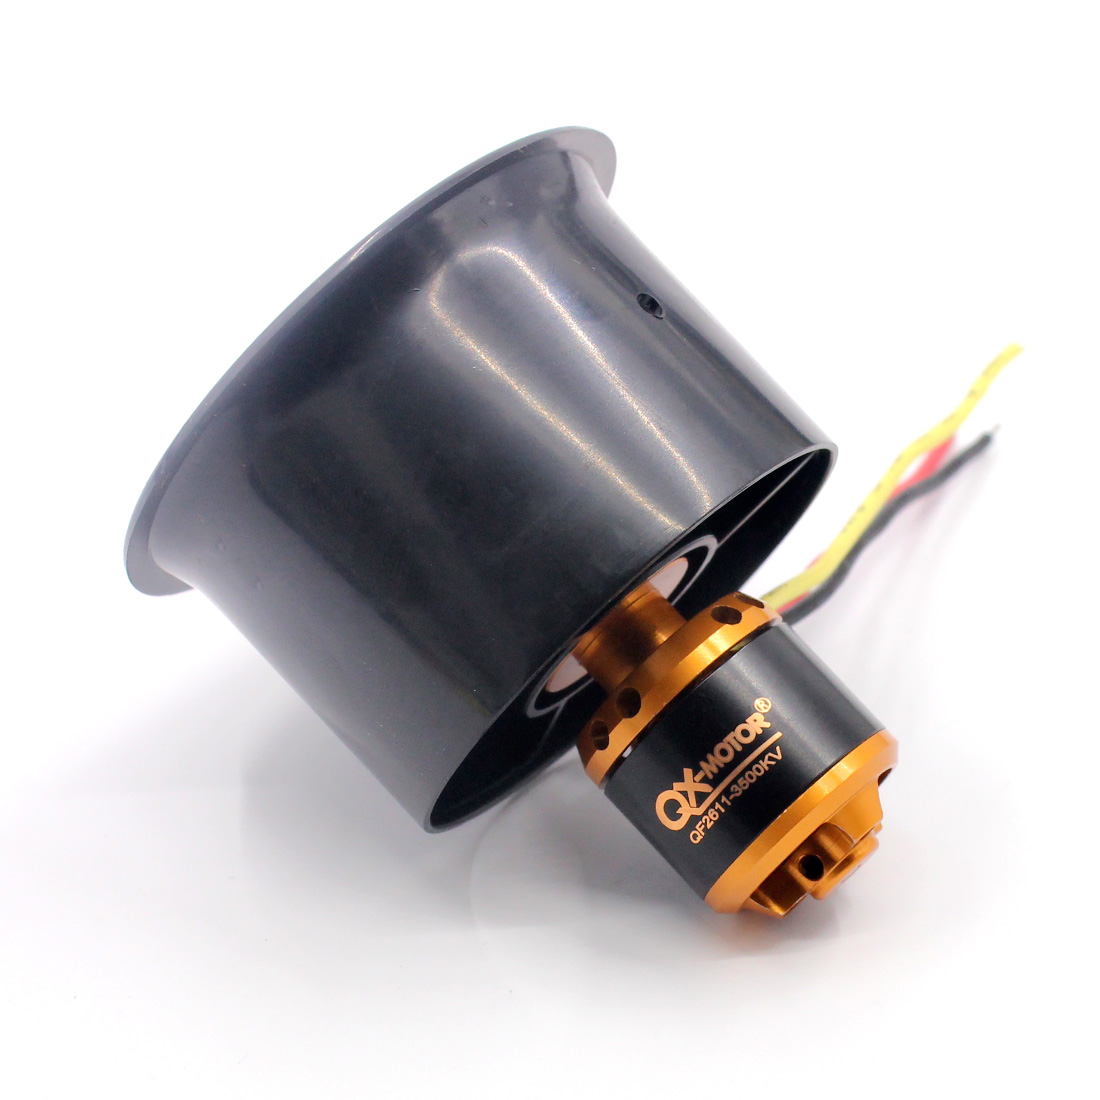 55mm/64mm 6/5 Blades EDF Ducted Fan with QF2611 3500KV/4500KV Brushless Motor